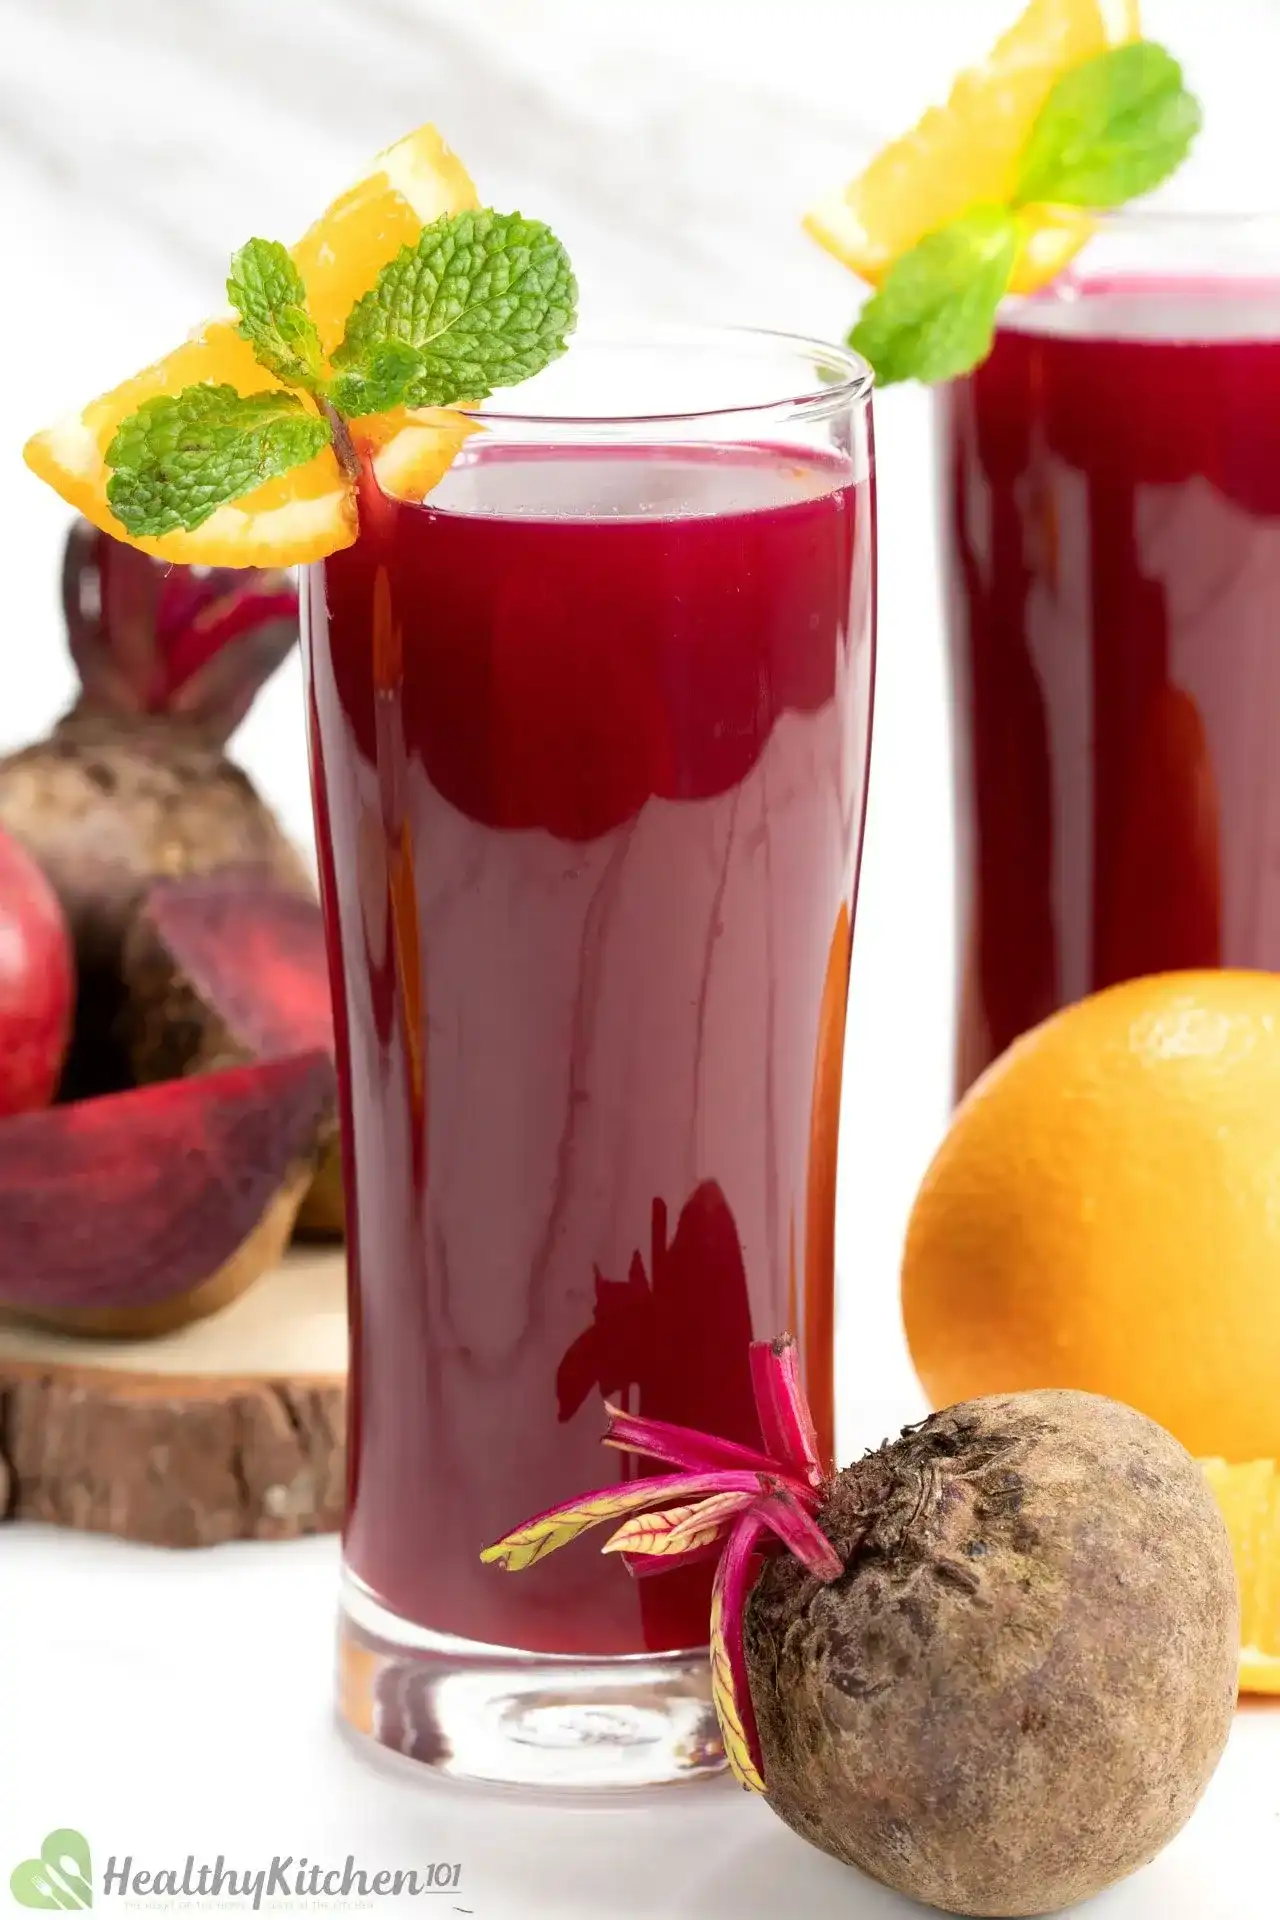 Beetroot Juice: Benefits, Side Effects Uses Recipe), 57% OFF